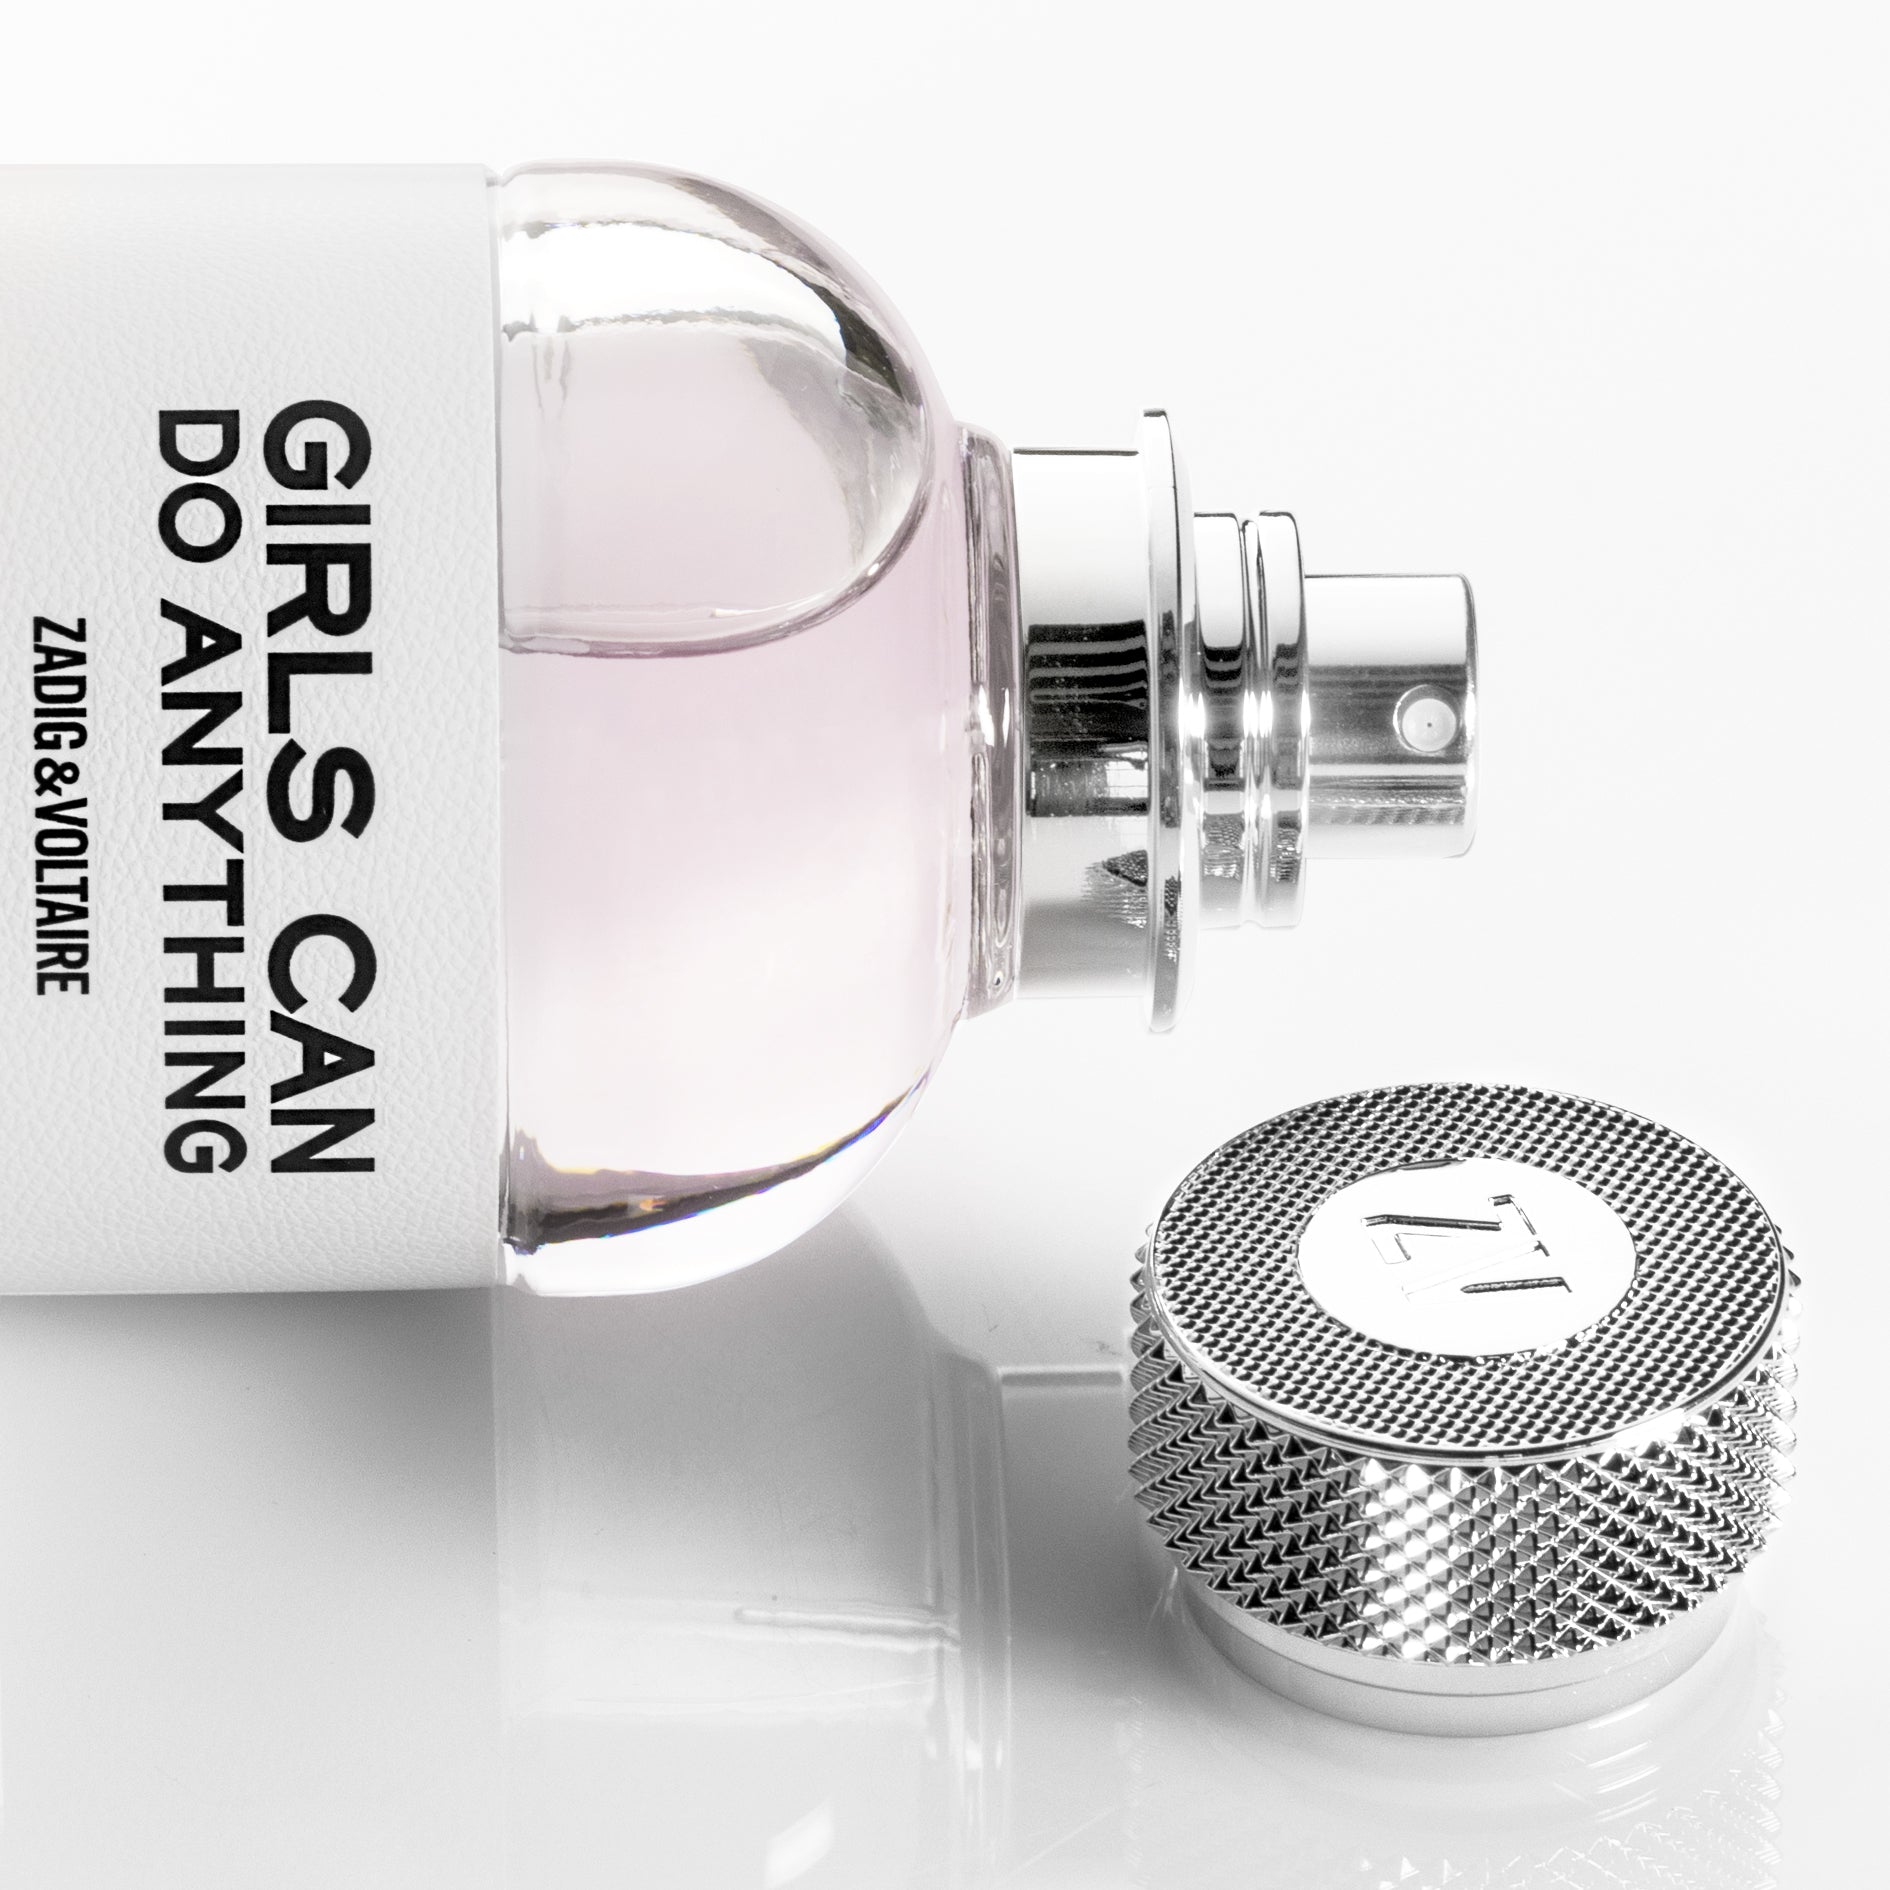 Zadig & Voltaire Girls Can Do Anything EDP | My Perfume Shop Australia